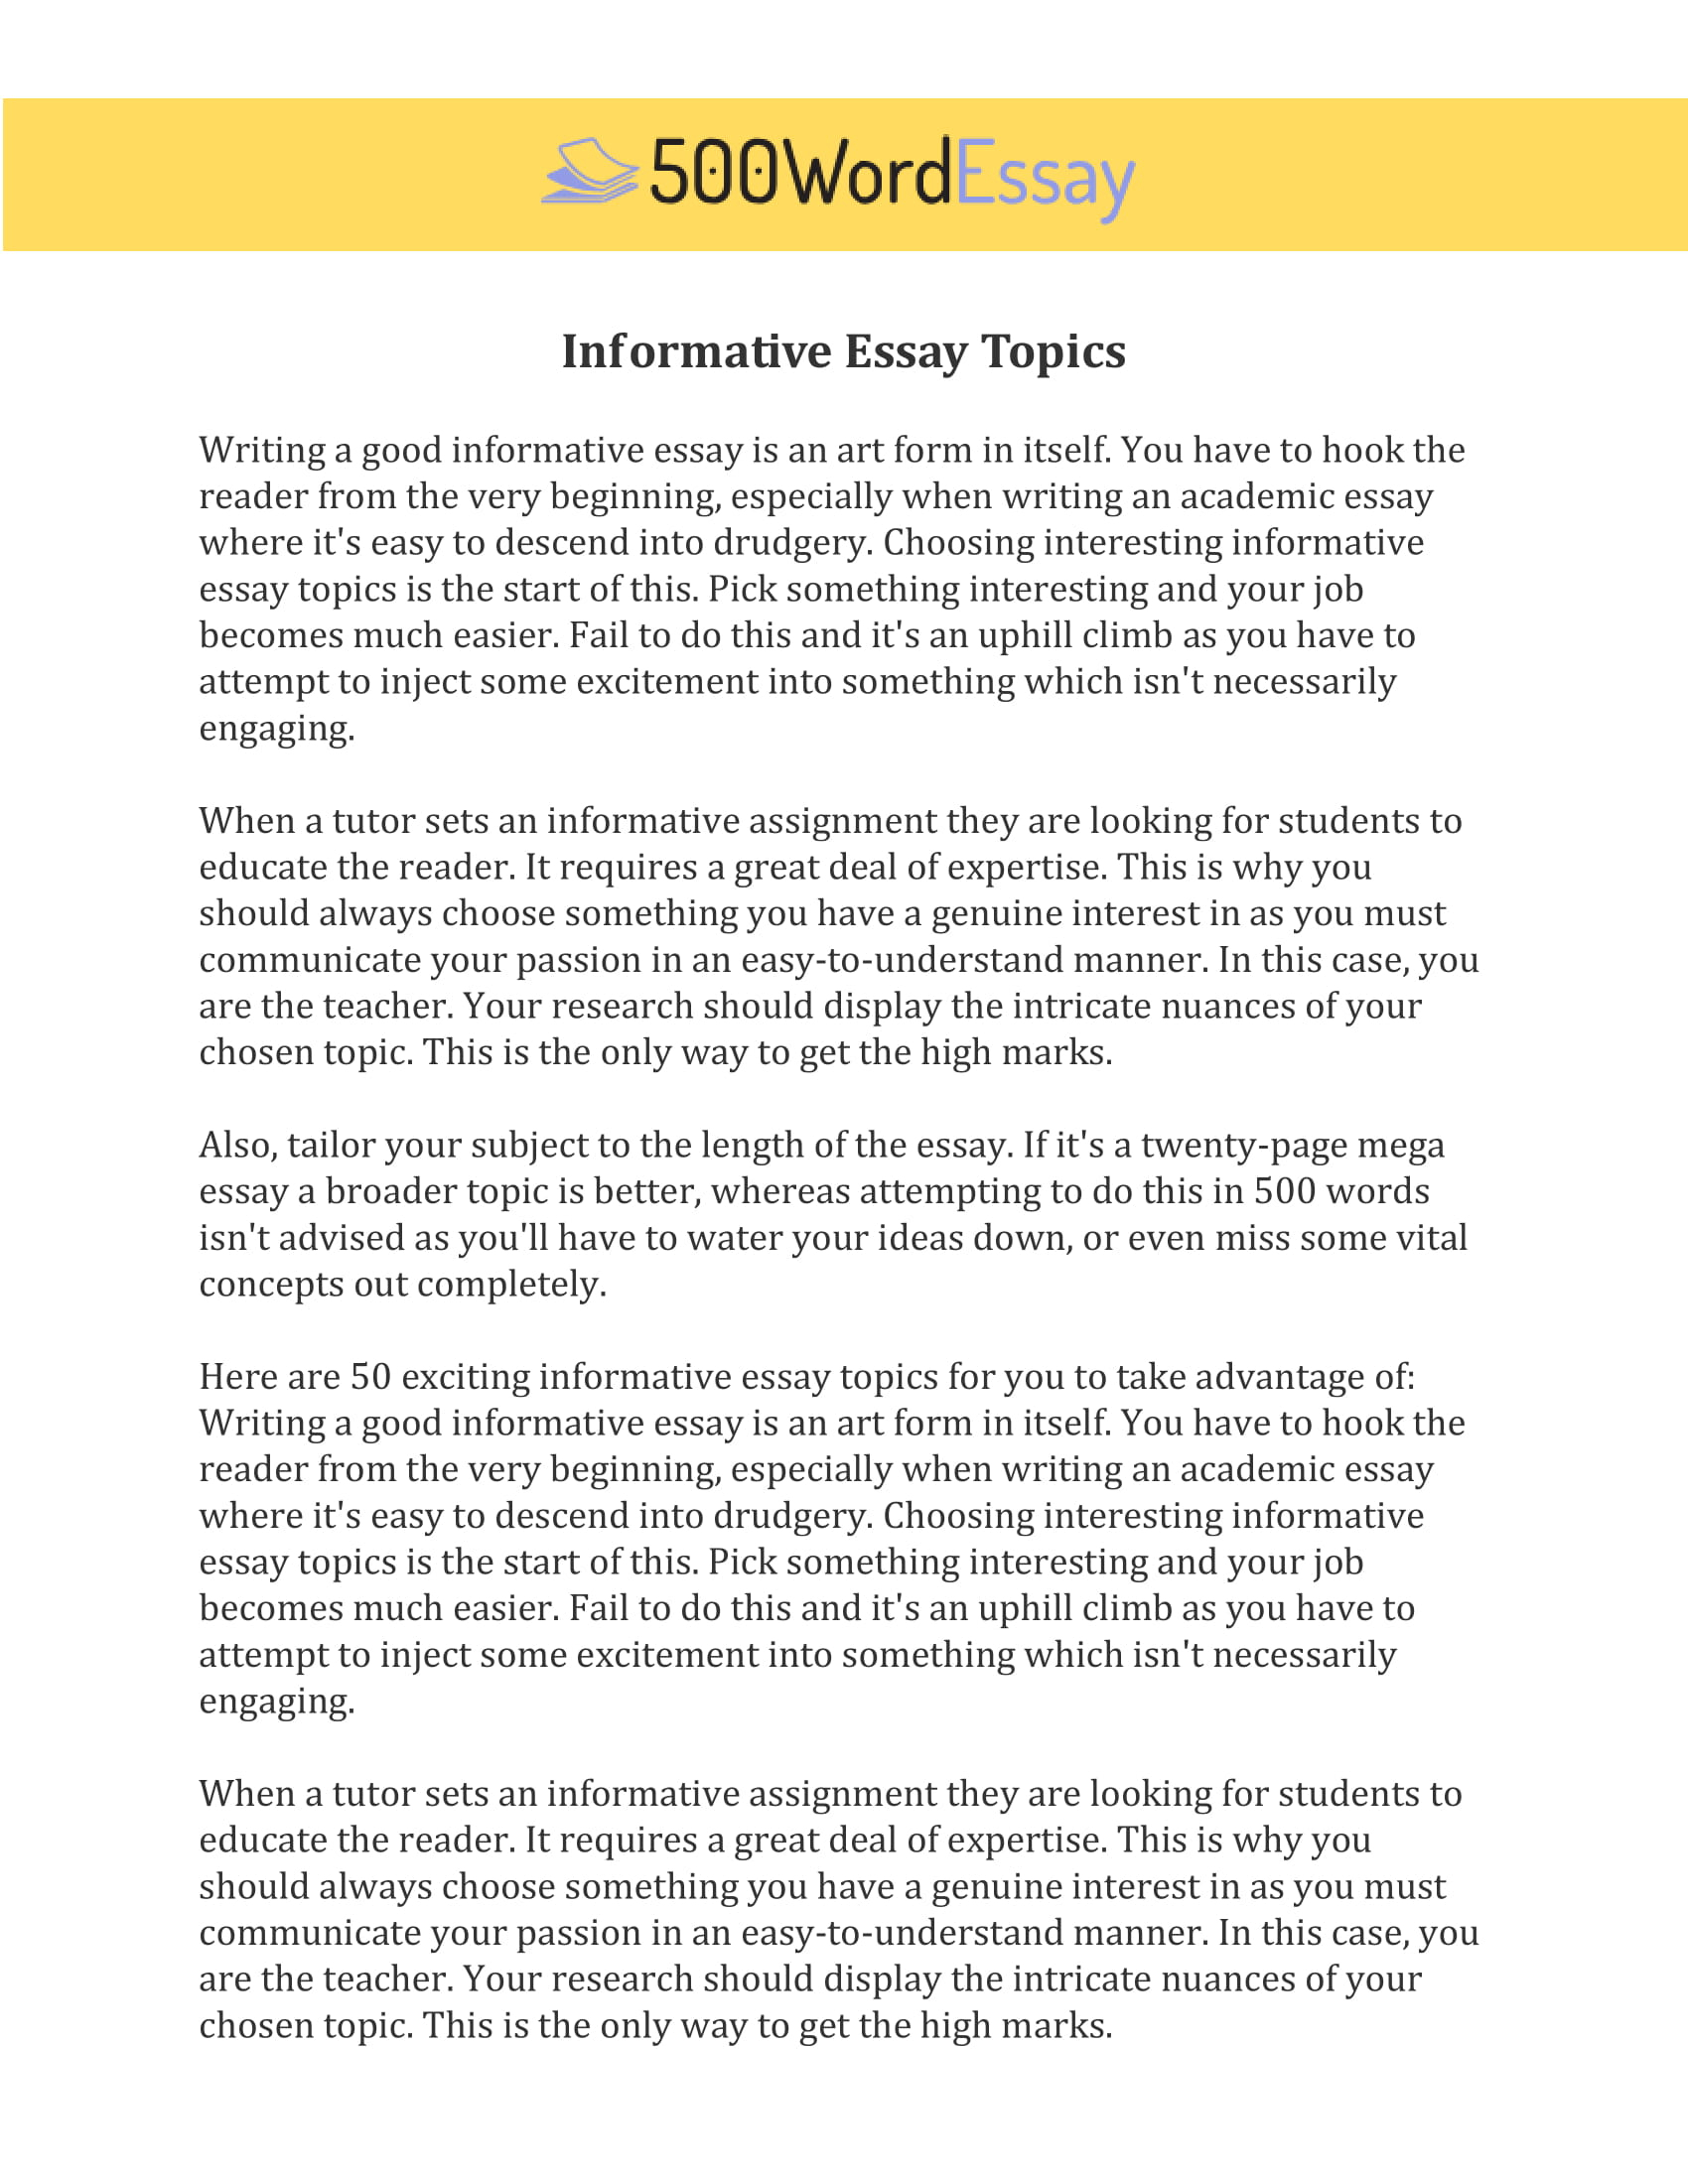 Informative Essay Examples, Samples, Outline To Write An A+ Throughout 500 Word Essay Template